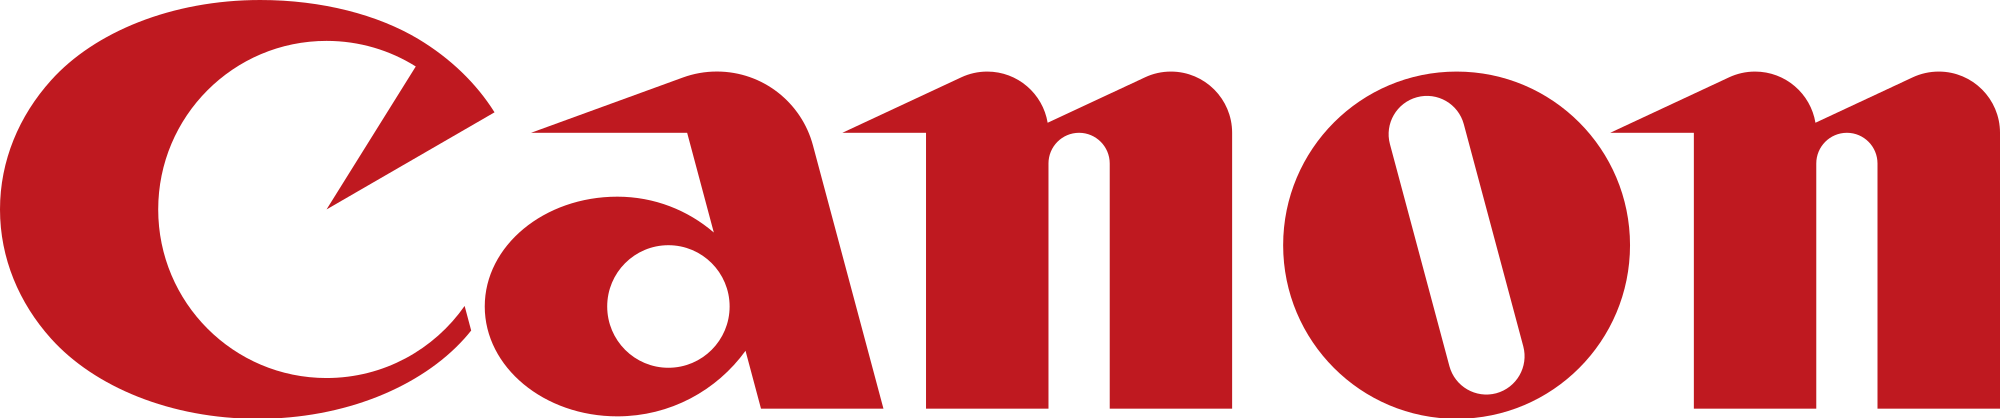 Canon_logo.png